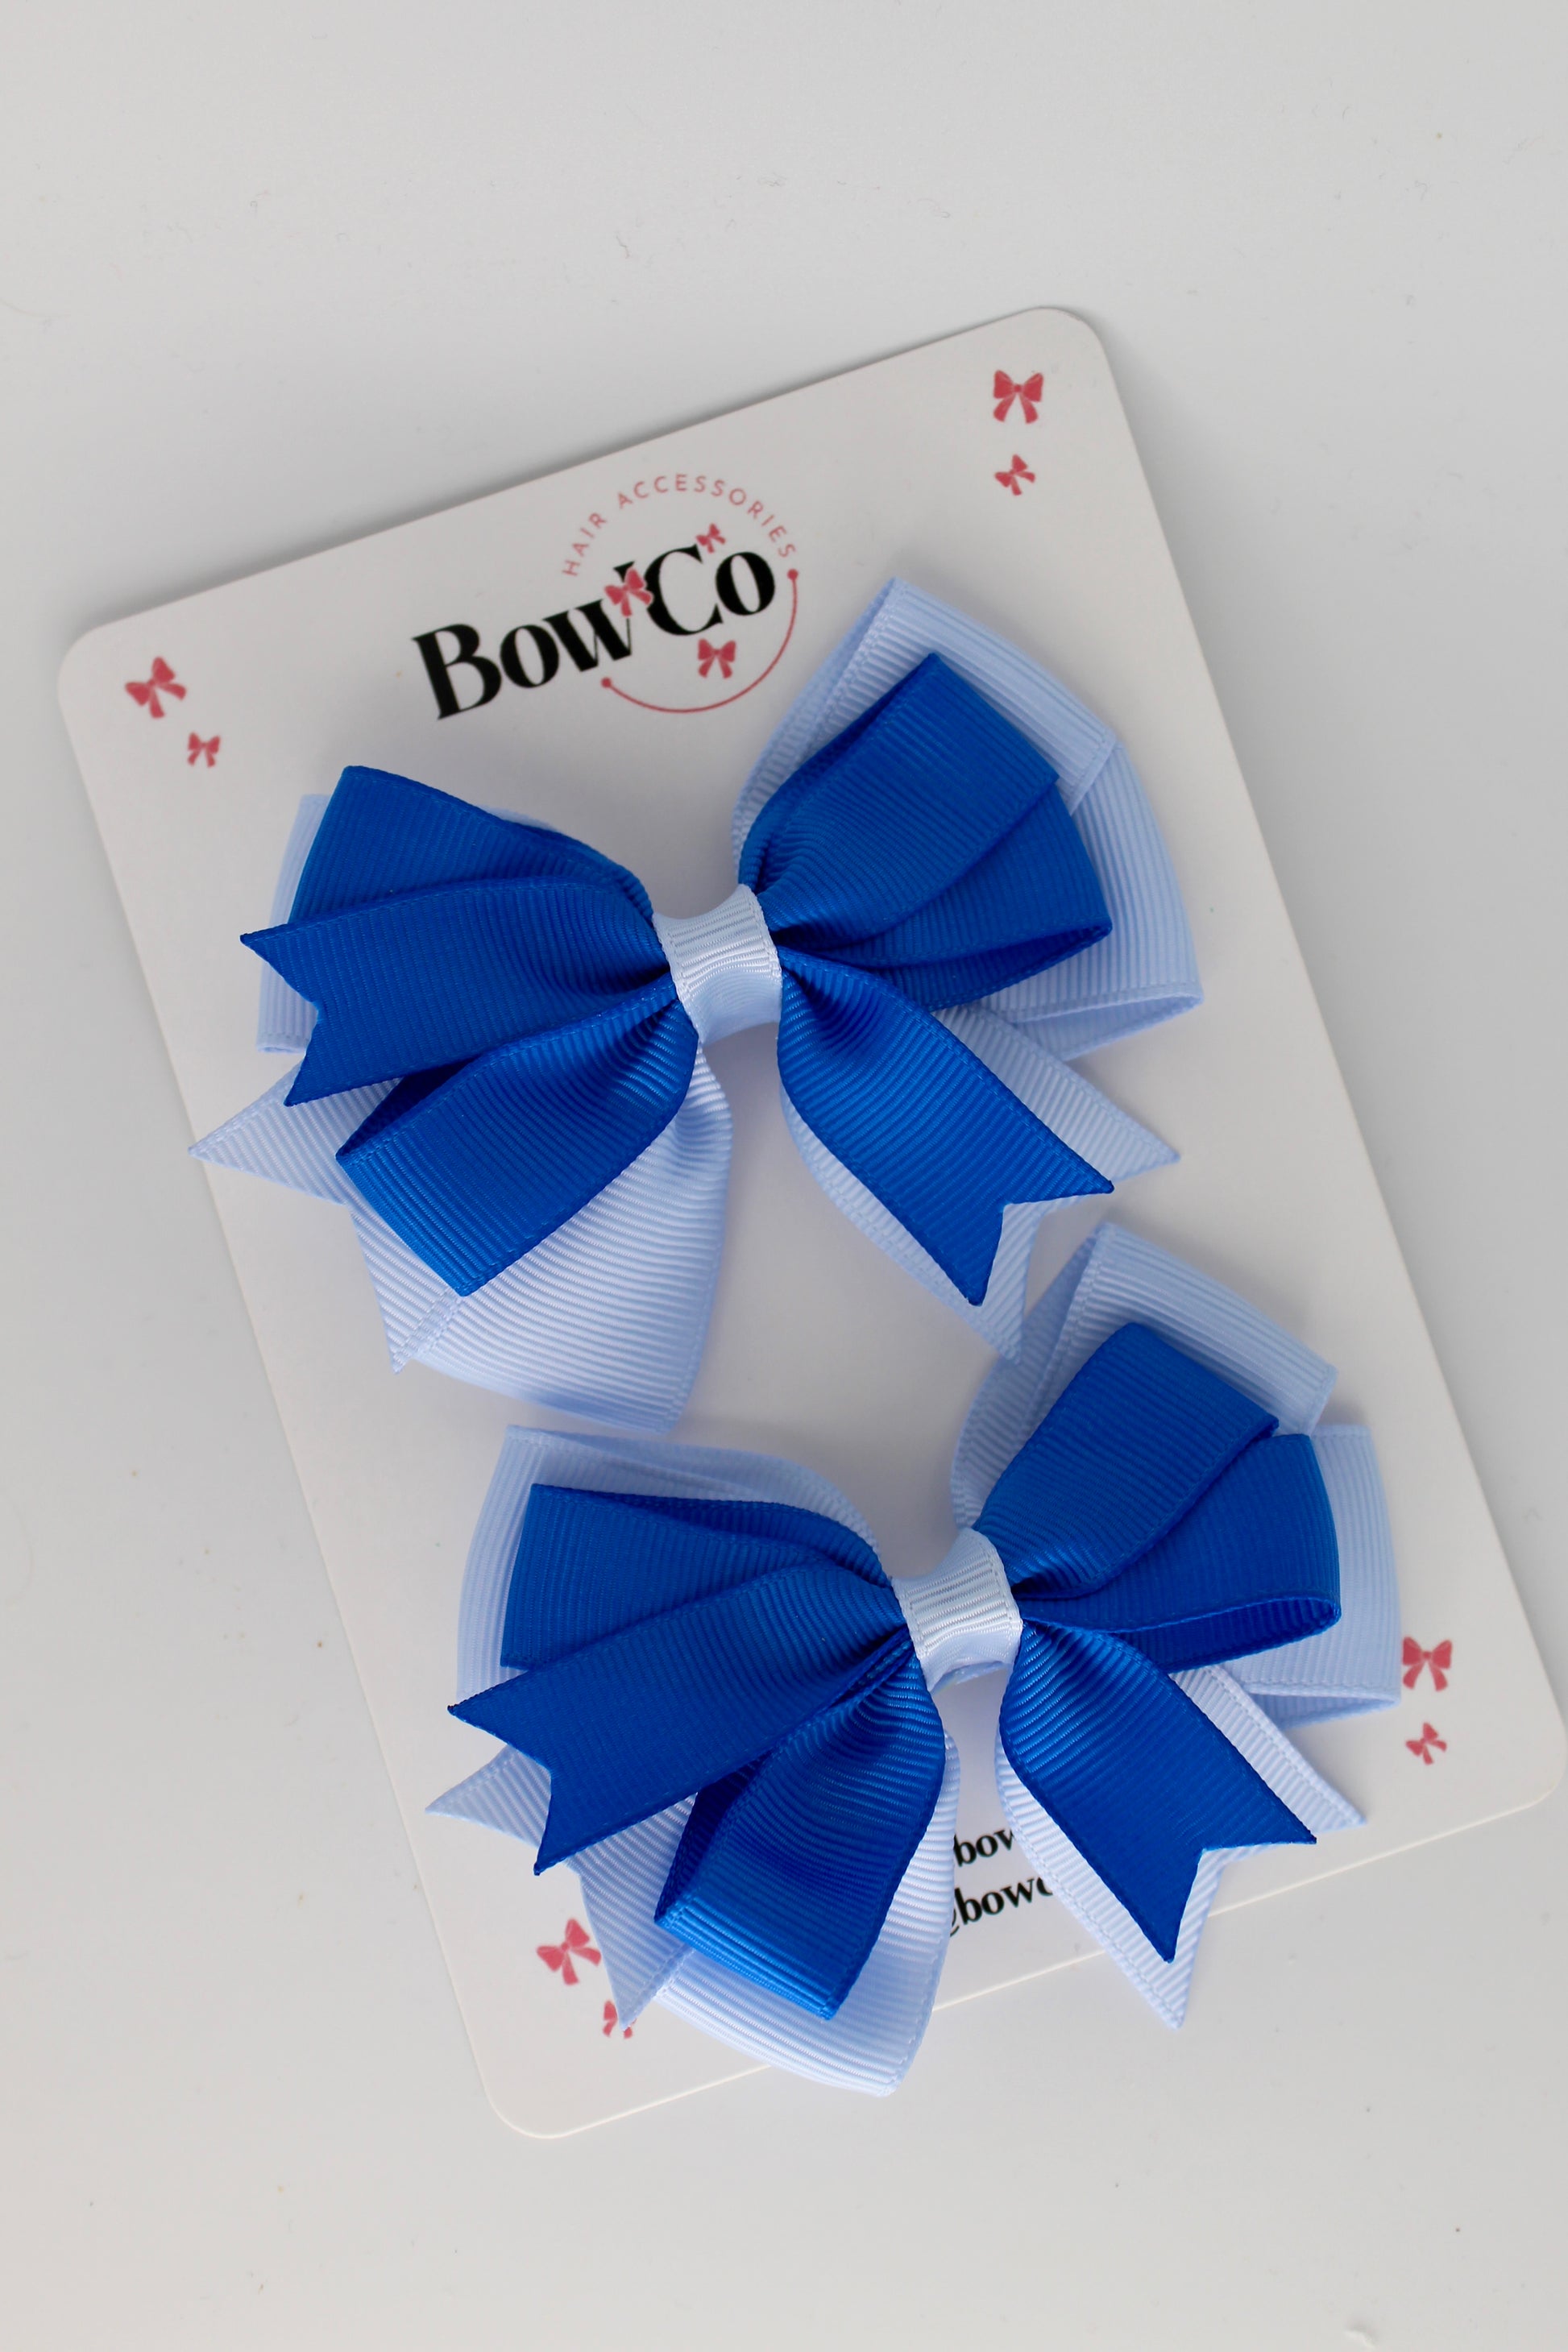 3 Inch Double Tail Bow - Clip - 2 Pack - Royal Blue and Bluebell